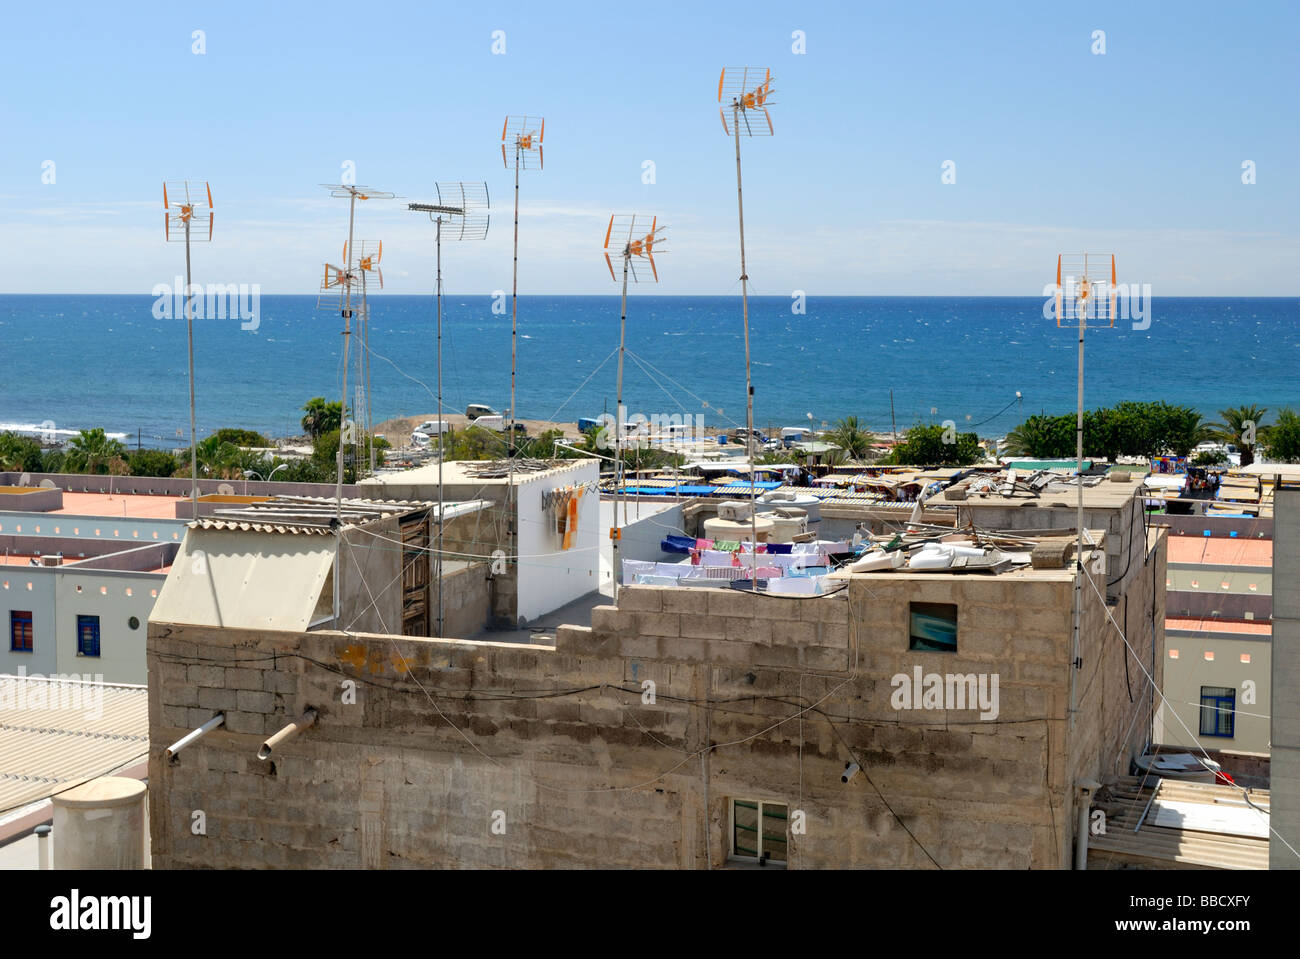 The antennas and clotheslines on the rooftop of a house in small coastal village of Arguineguin, Gran Canaria, Canary Islands, S Stock Photo